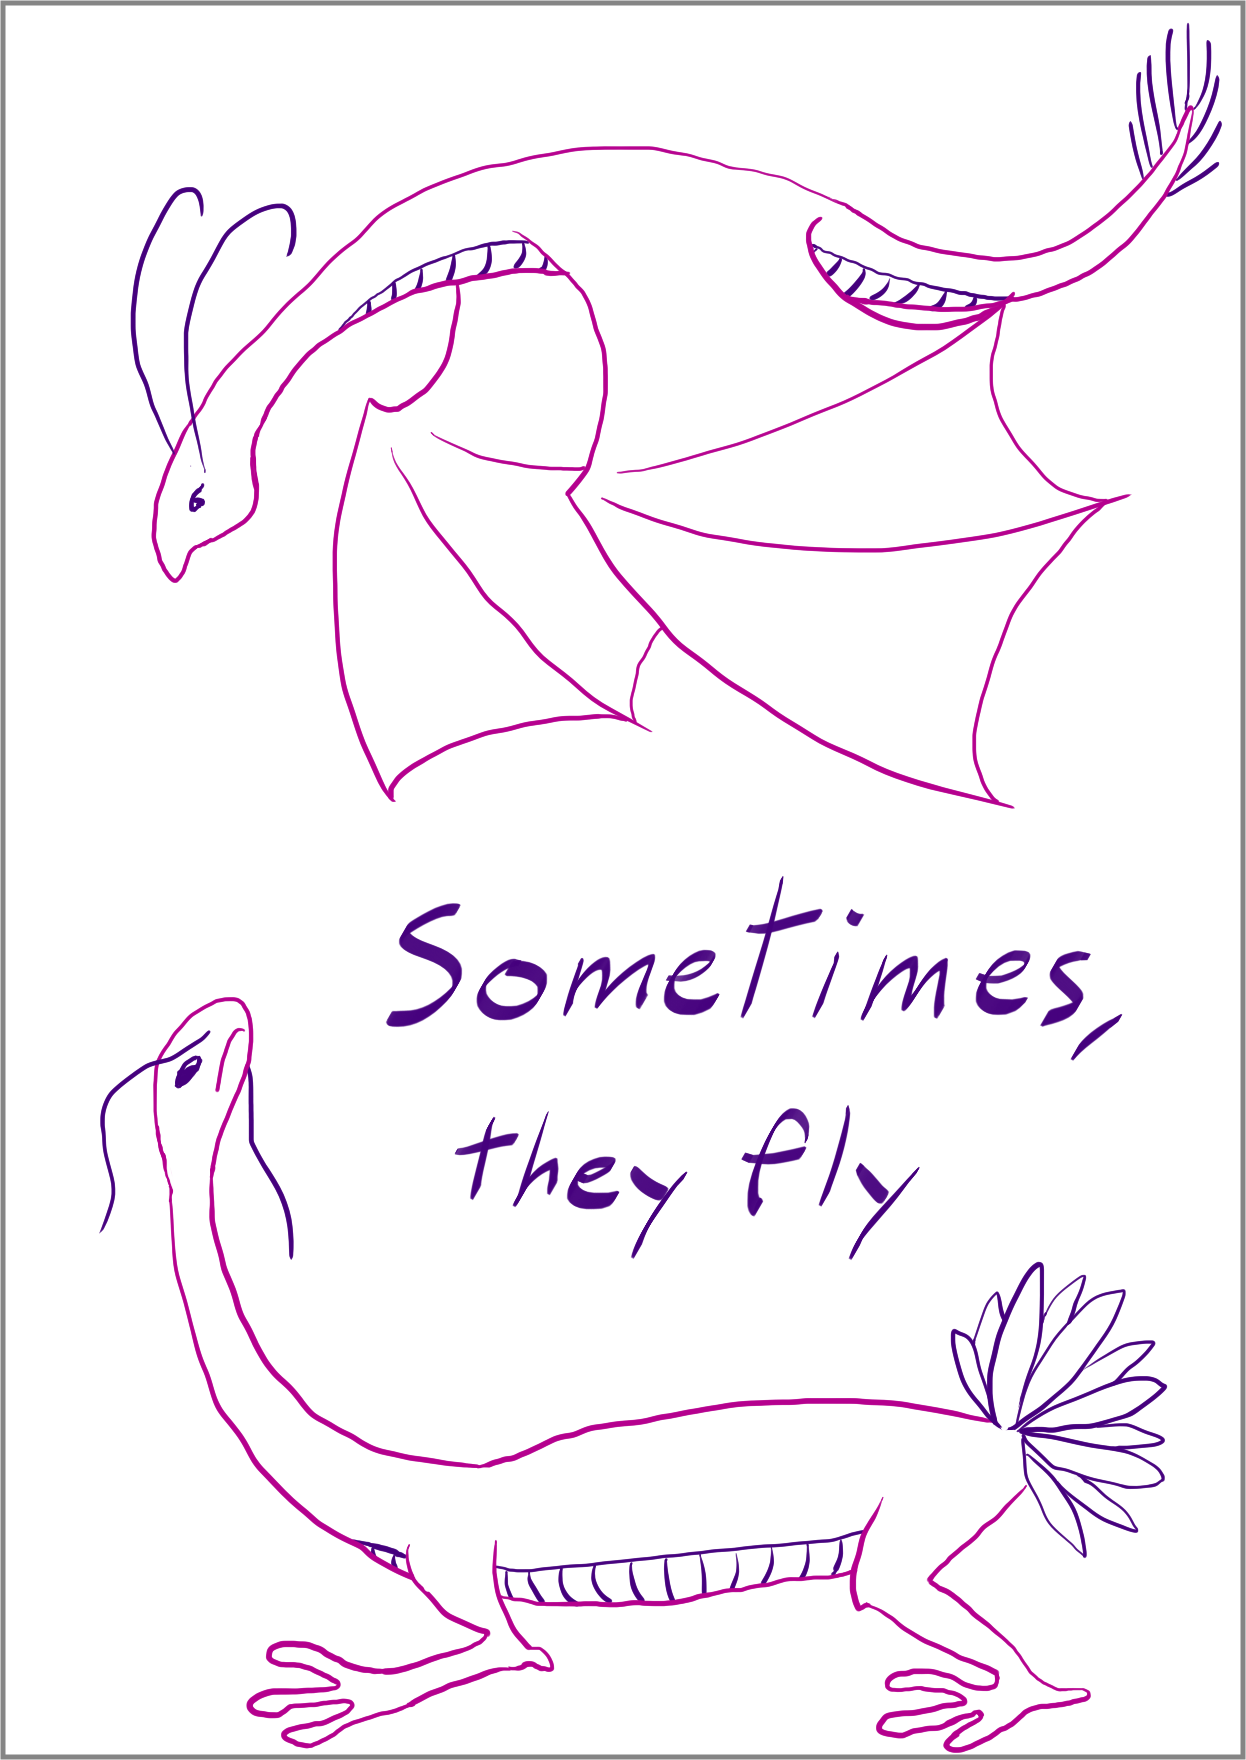 'Sometimes, they fly...' a dragon with two wings flying over a dragon with no wings, lineart